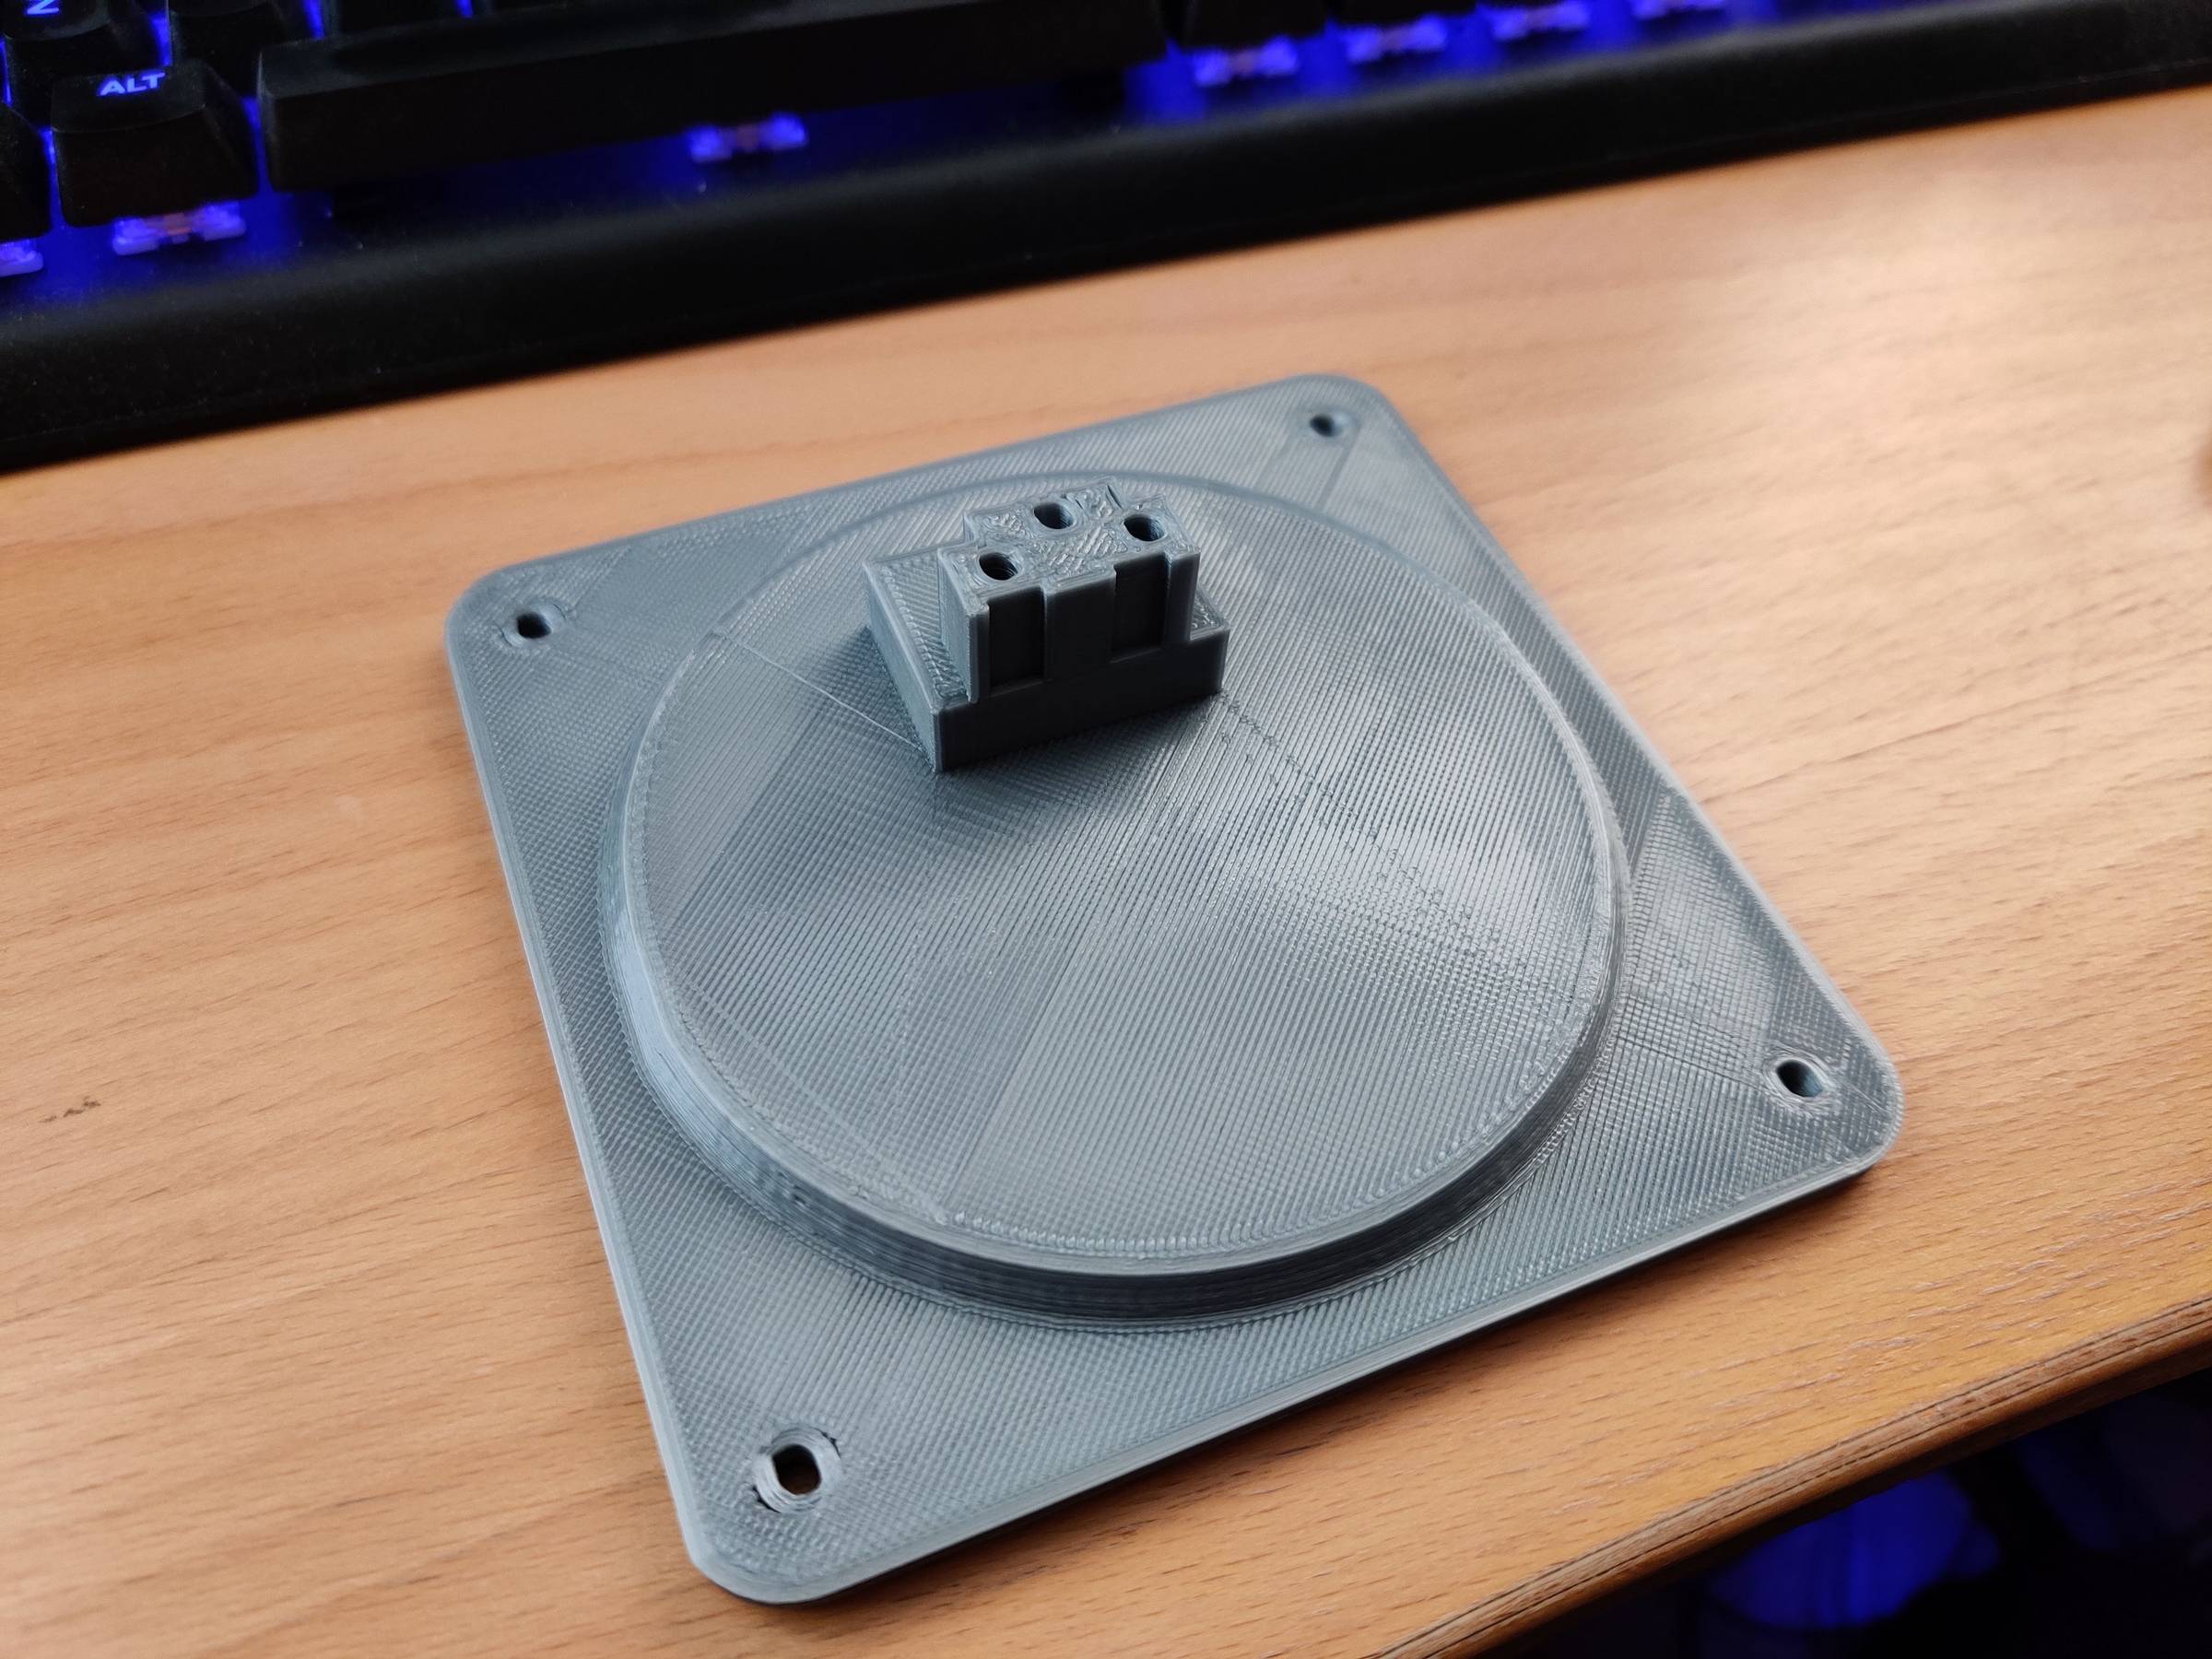 Vesa Mount Adapter For Aoc Q3279vwfd8 By Veepee78 Thingiverse